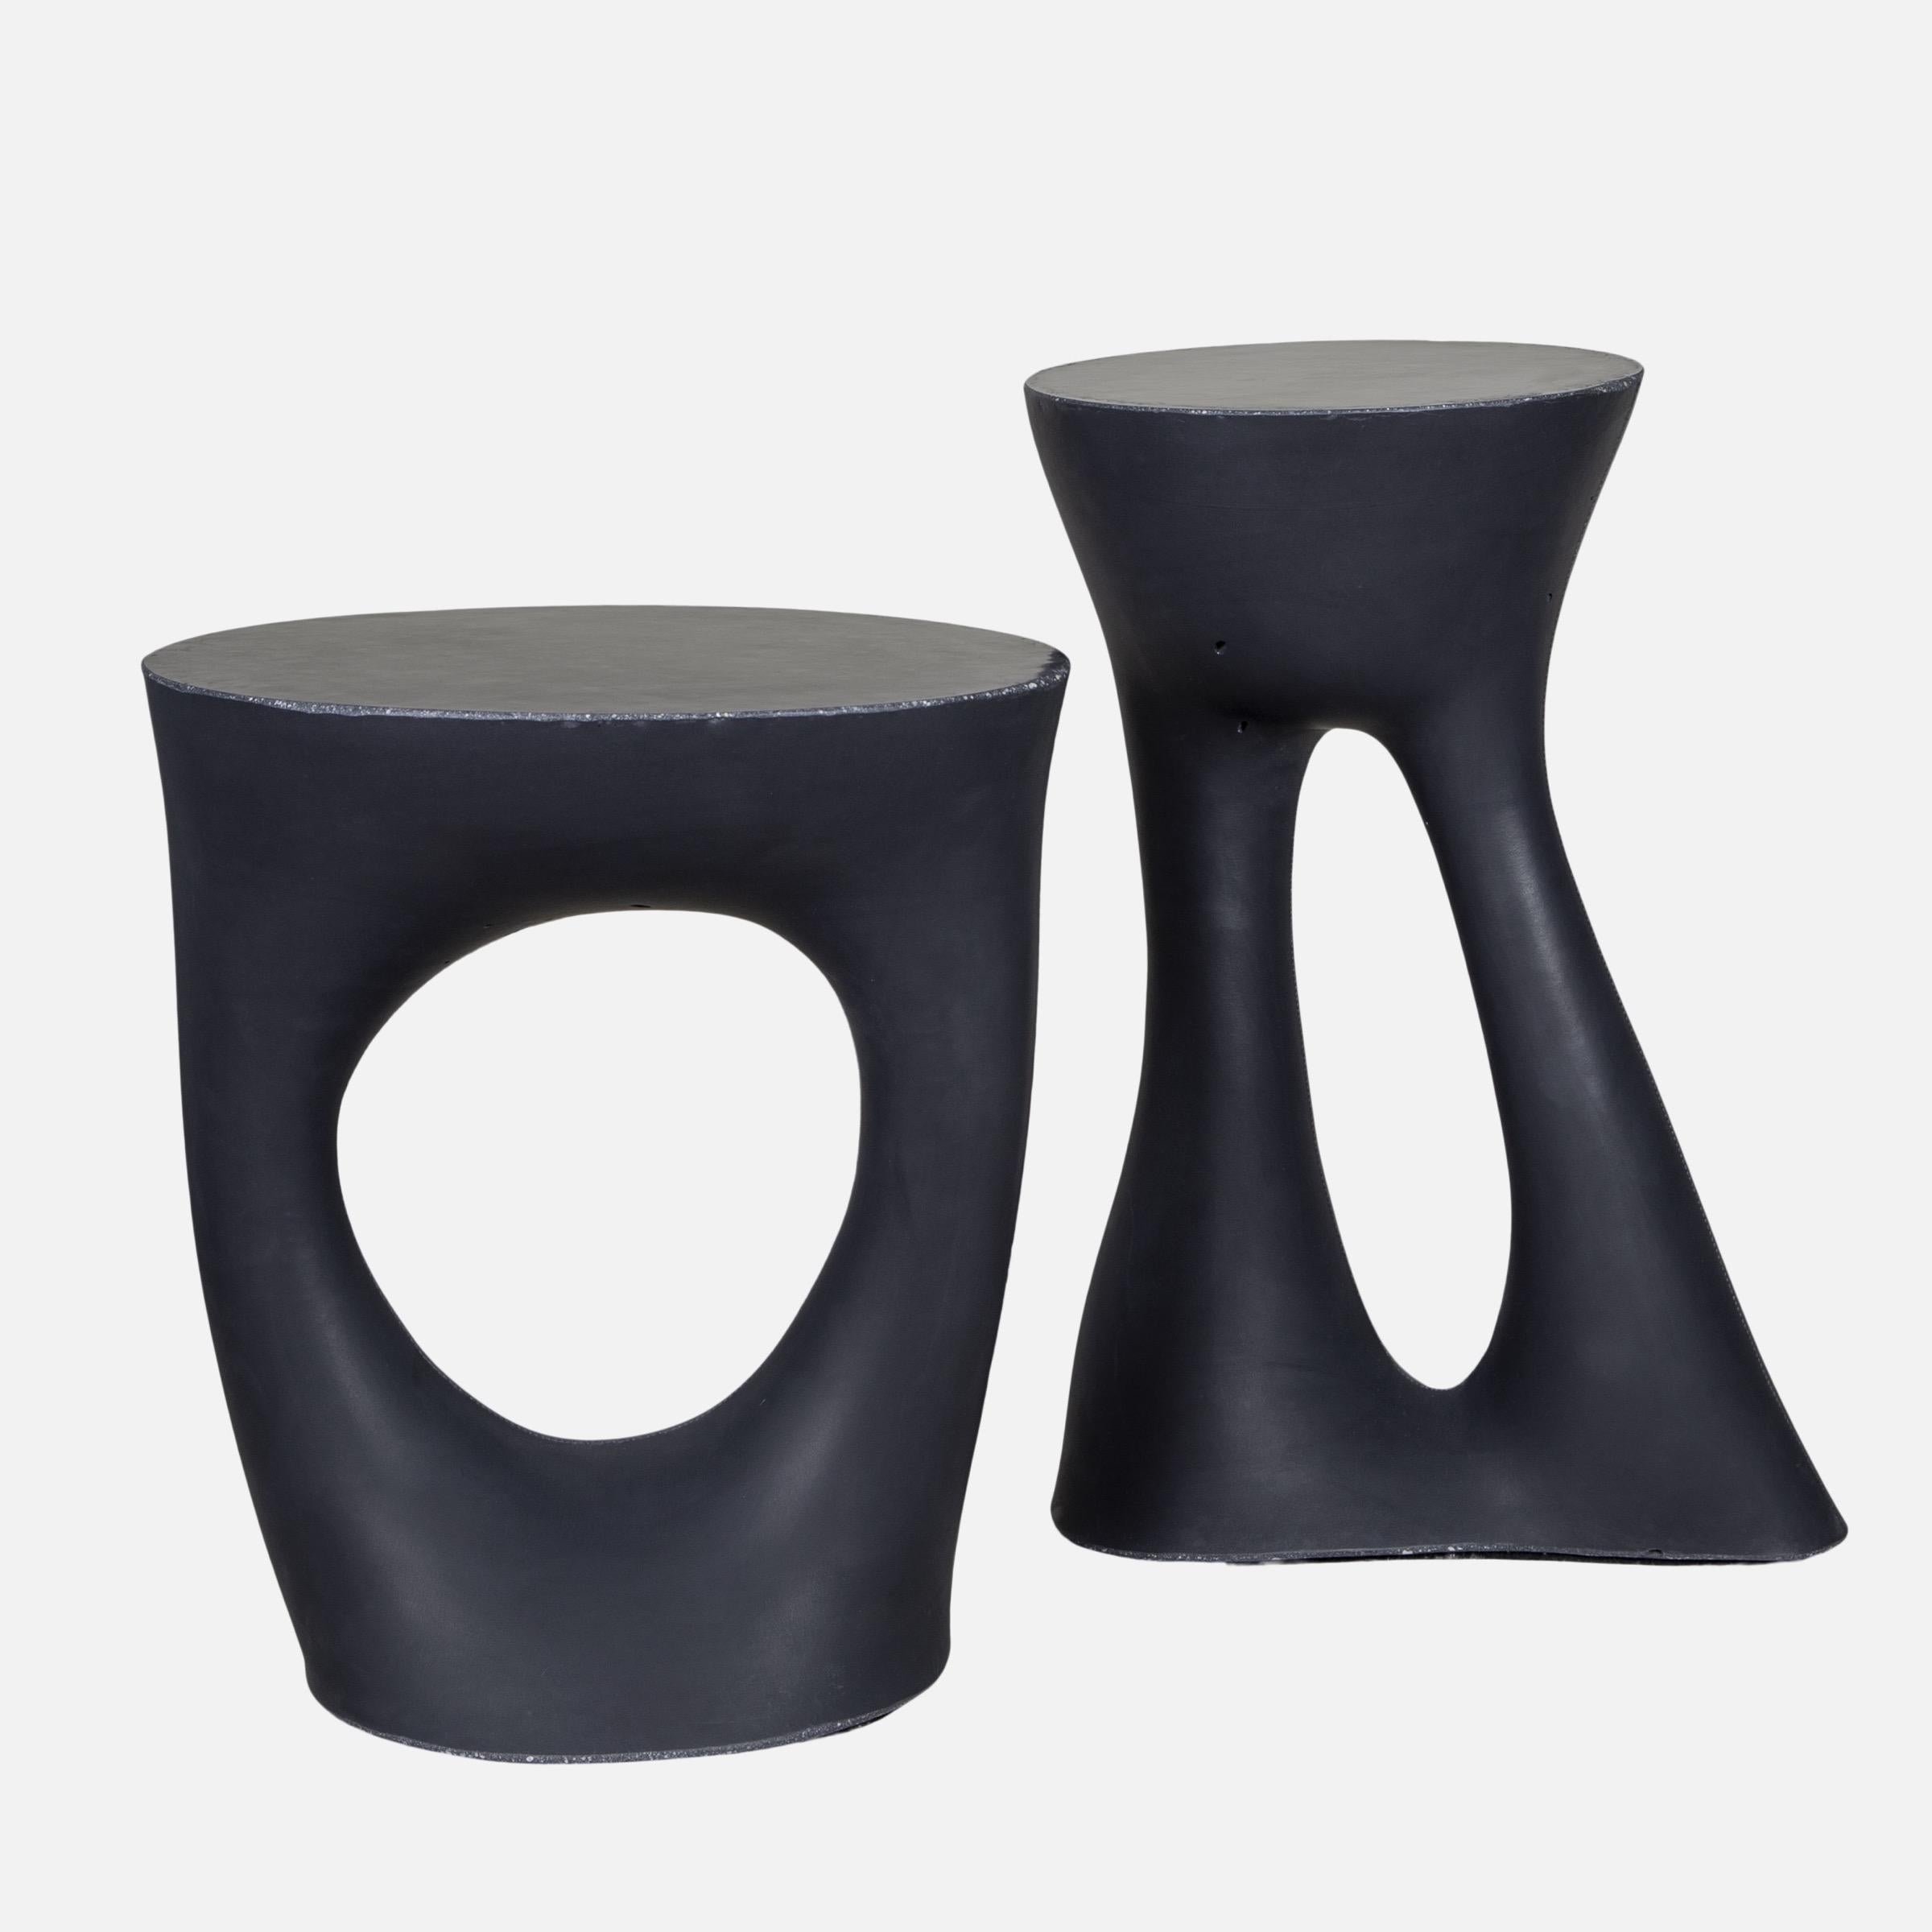 Modern Pair of Black Kreten Side Tables from Souda, Tall, Made to Order